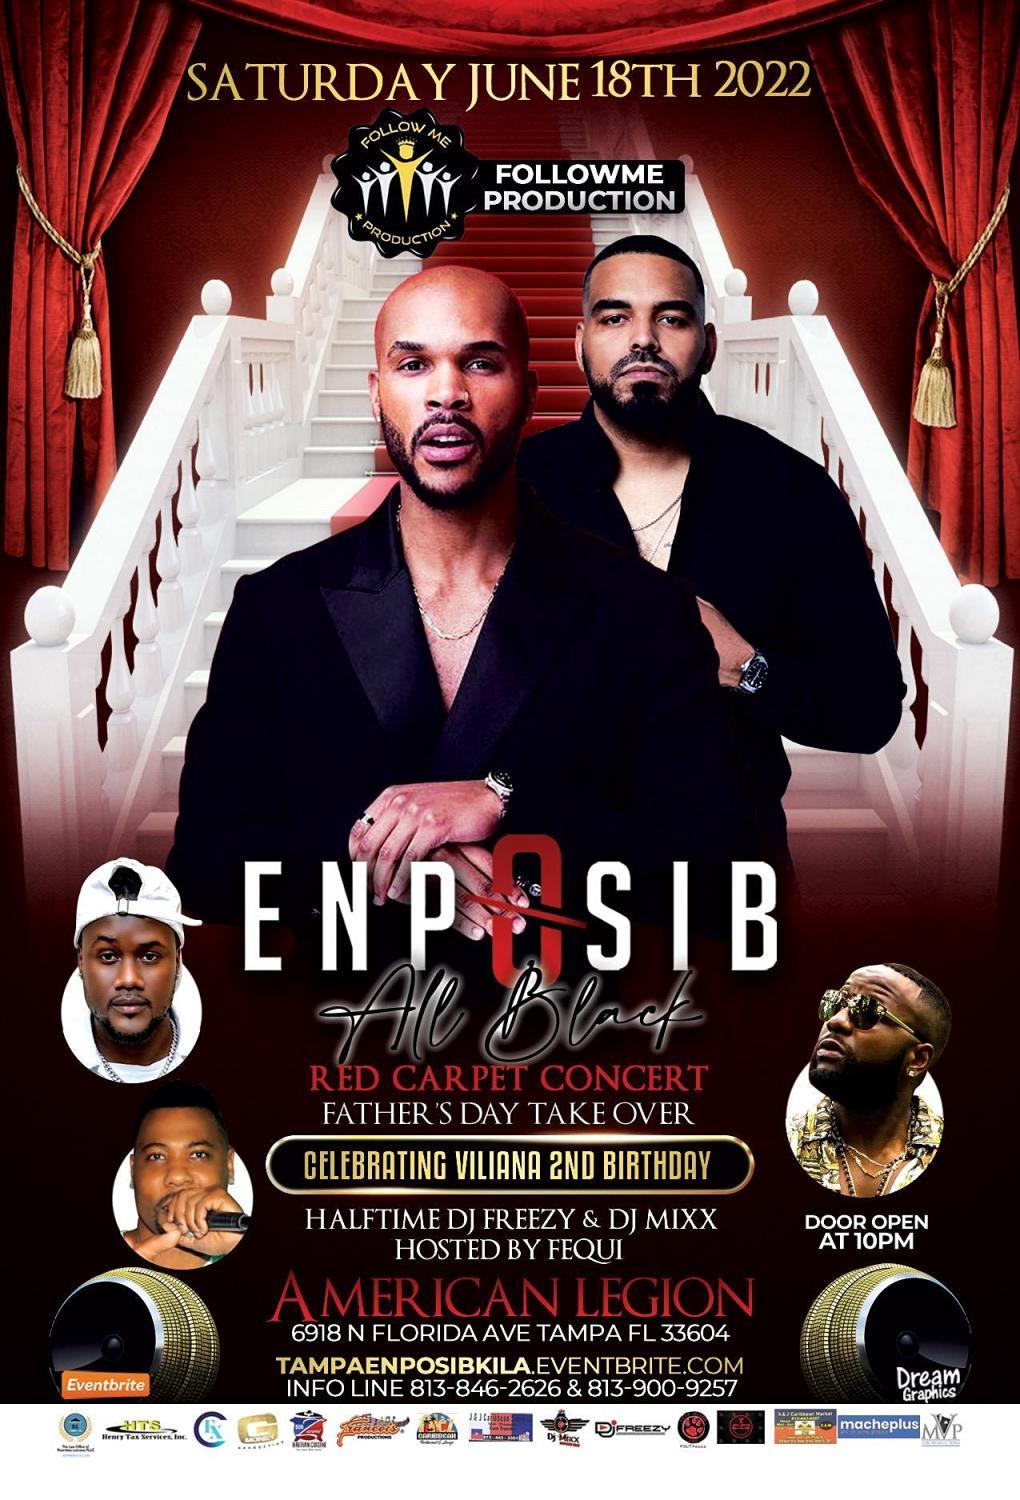 ENPOSIB/ALL BLACK RED CARPET CONCERT//FATHER'S DAY TAKE OVER